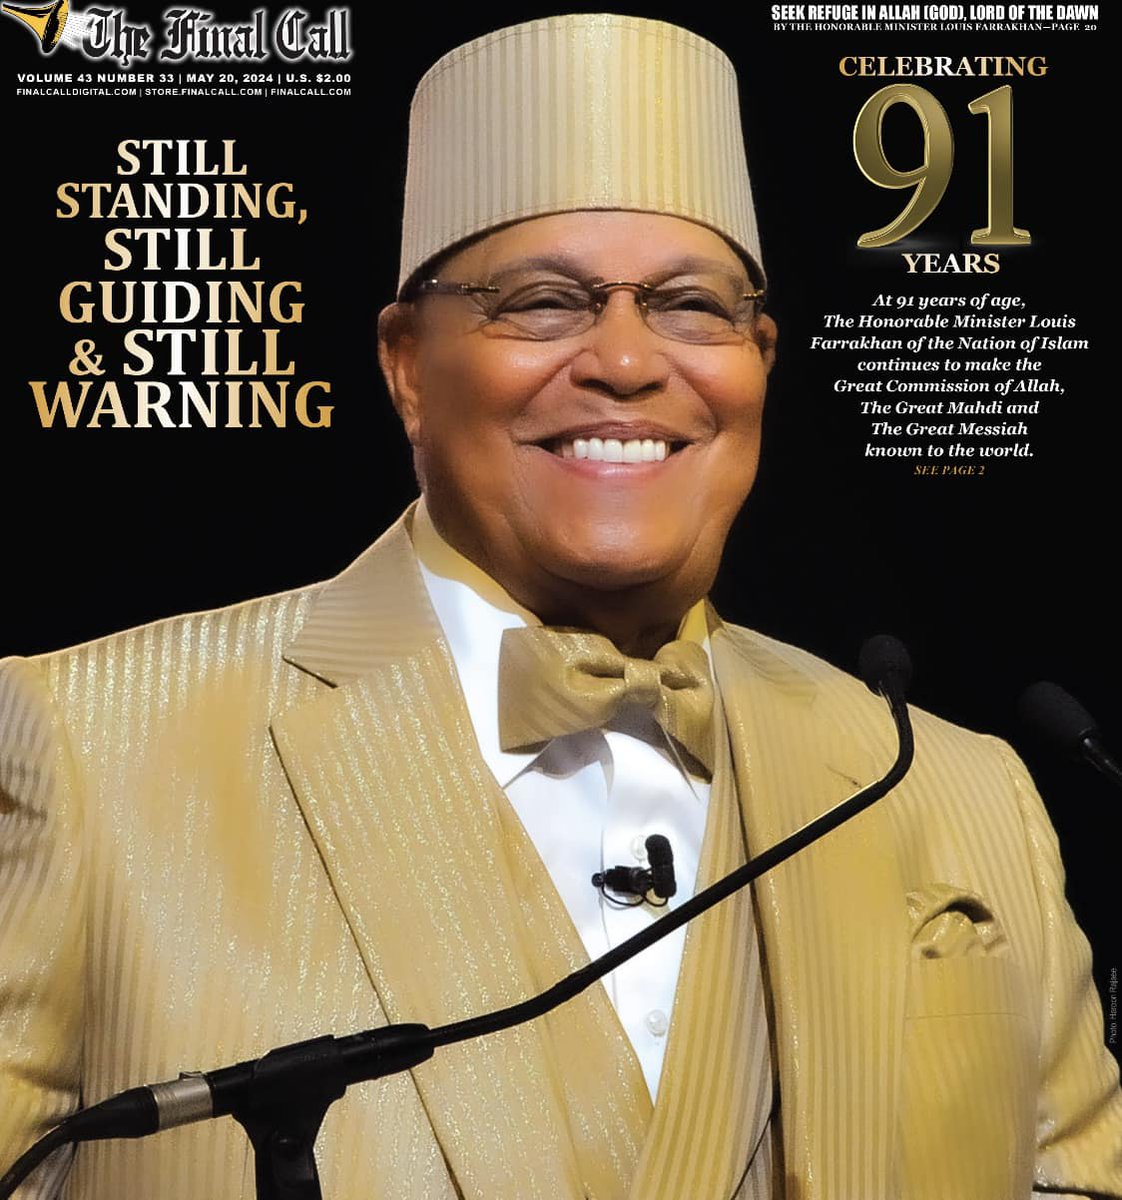 Still Standing, Still Guiding & Still Warning To help The Honorable Minister Louis Farrakhan to continue his great work, please donate to the Saviours' Day Gift 2025 @ tnp.noi.org/sddonations?id… Thank you in advance & may Allah continue to bless you #Farrakhan #SavioursDay2025